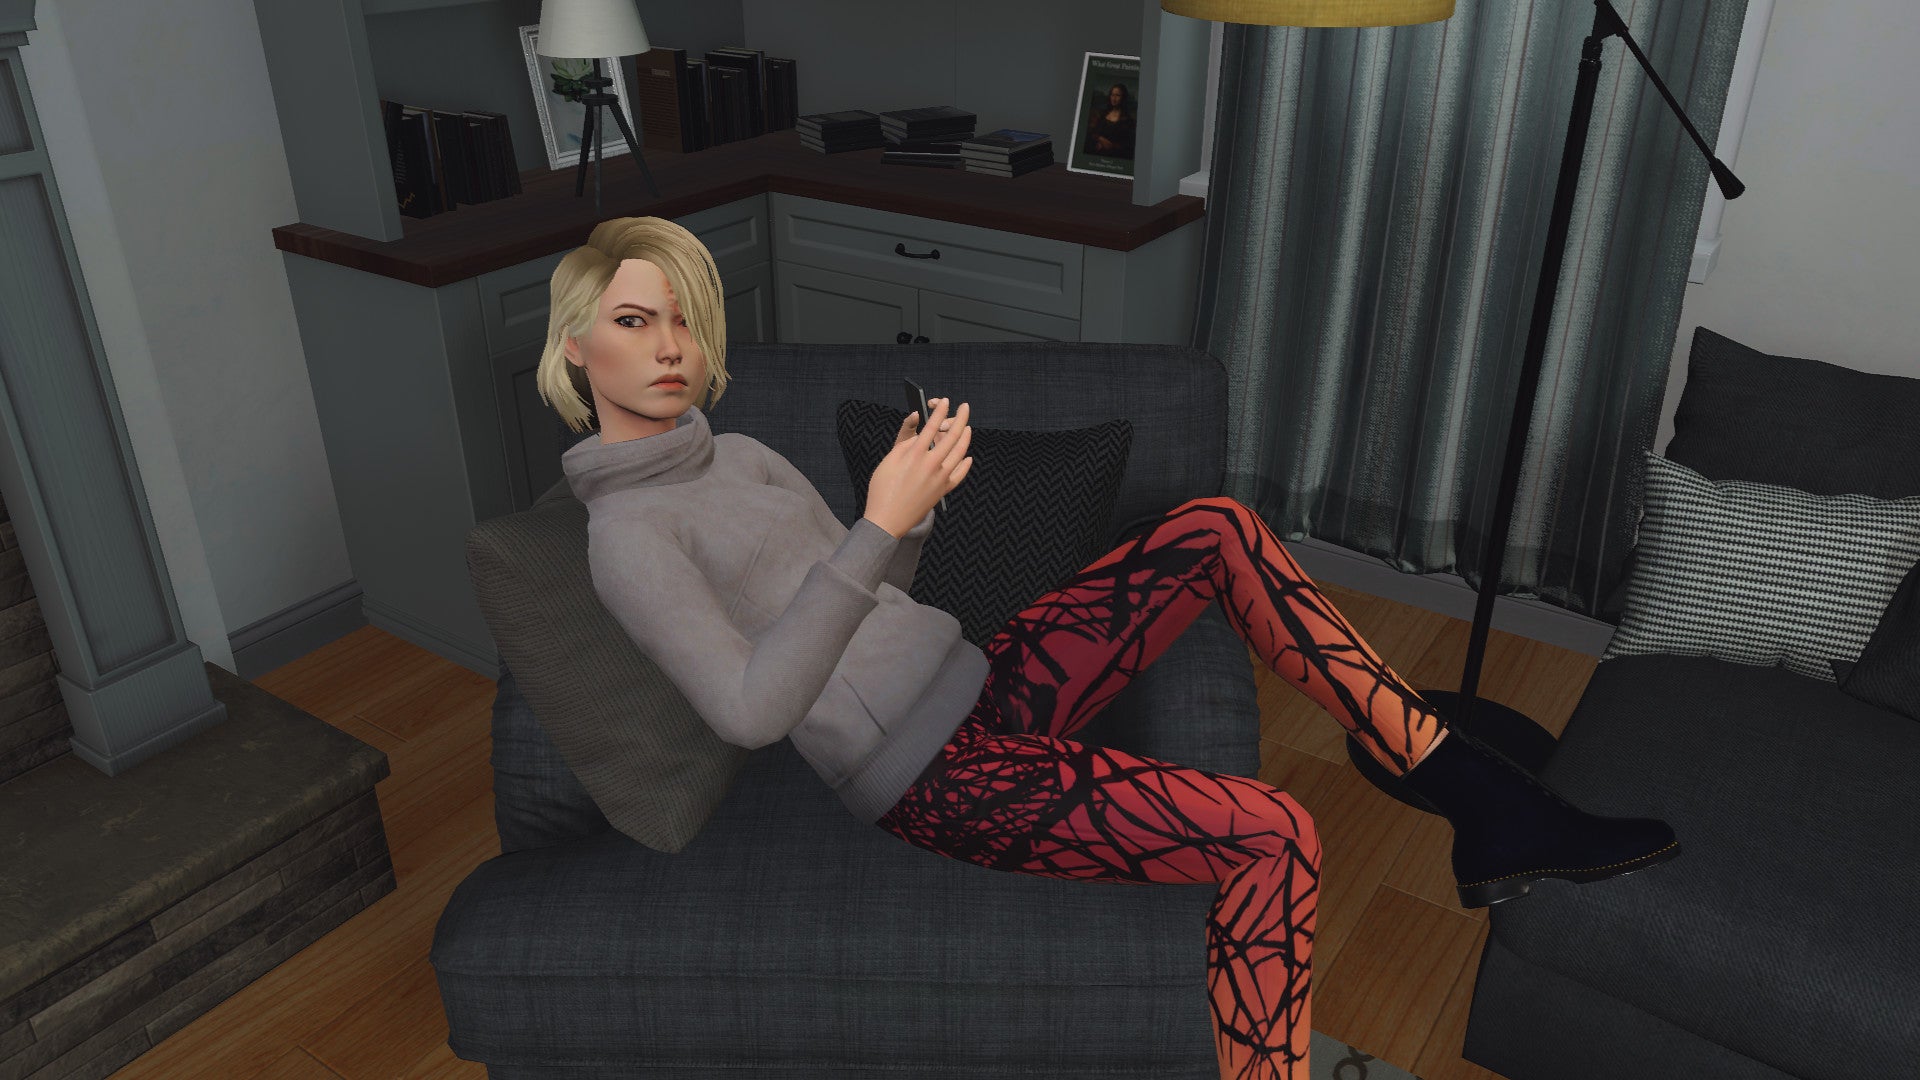 A screenshot of a young white woman with blonde hair and orangey-red leggings, sprawling in an armchair, from the game Nancy Drew: Midnight In Salem